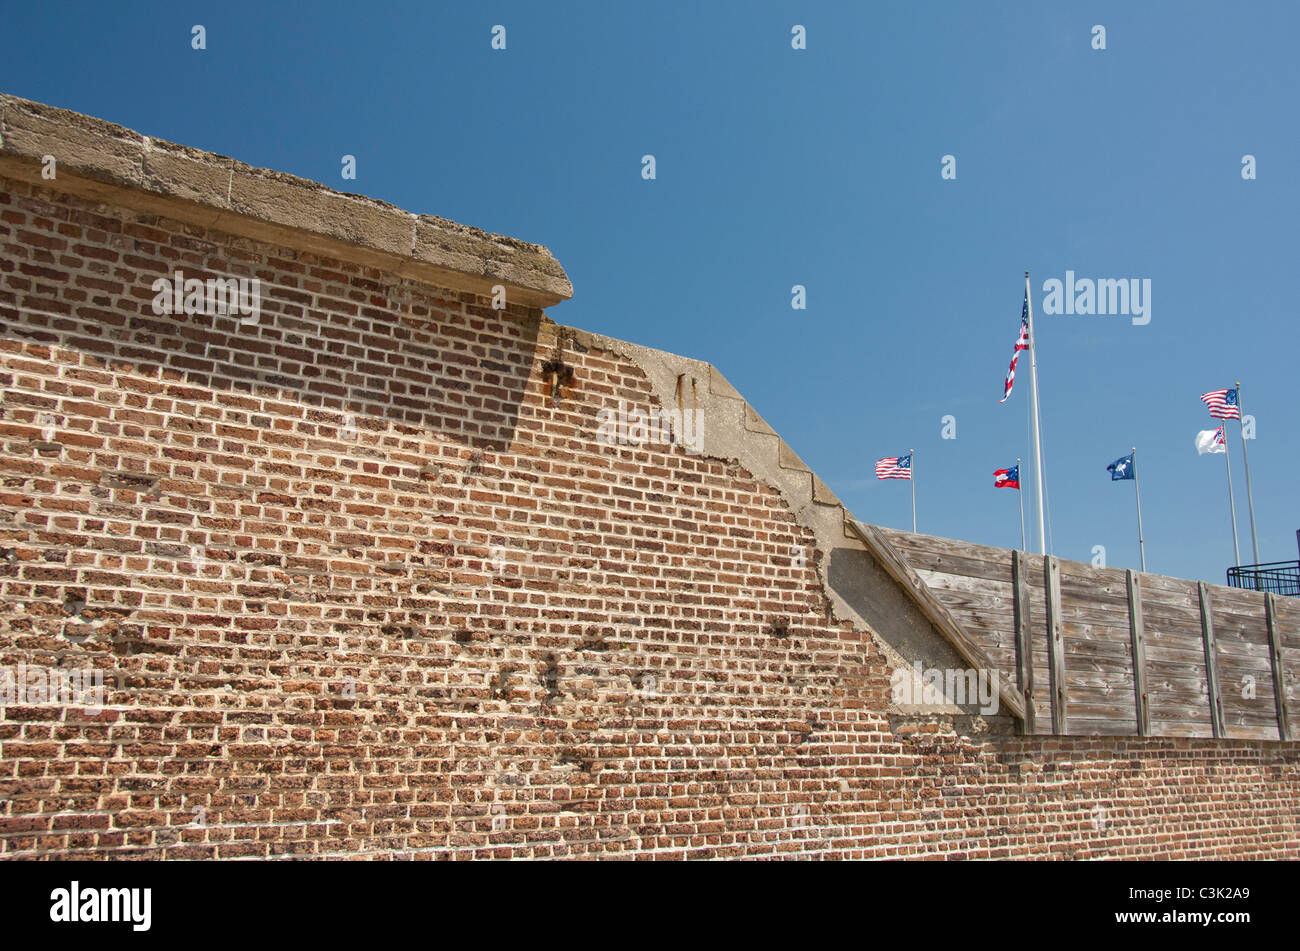 South Carolina, Charleston, Fort Sumter National Monument. Historic fort walls and battle flags. Stock Photo